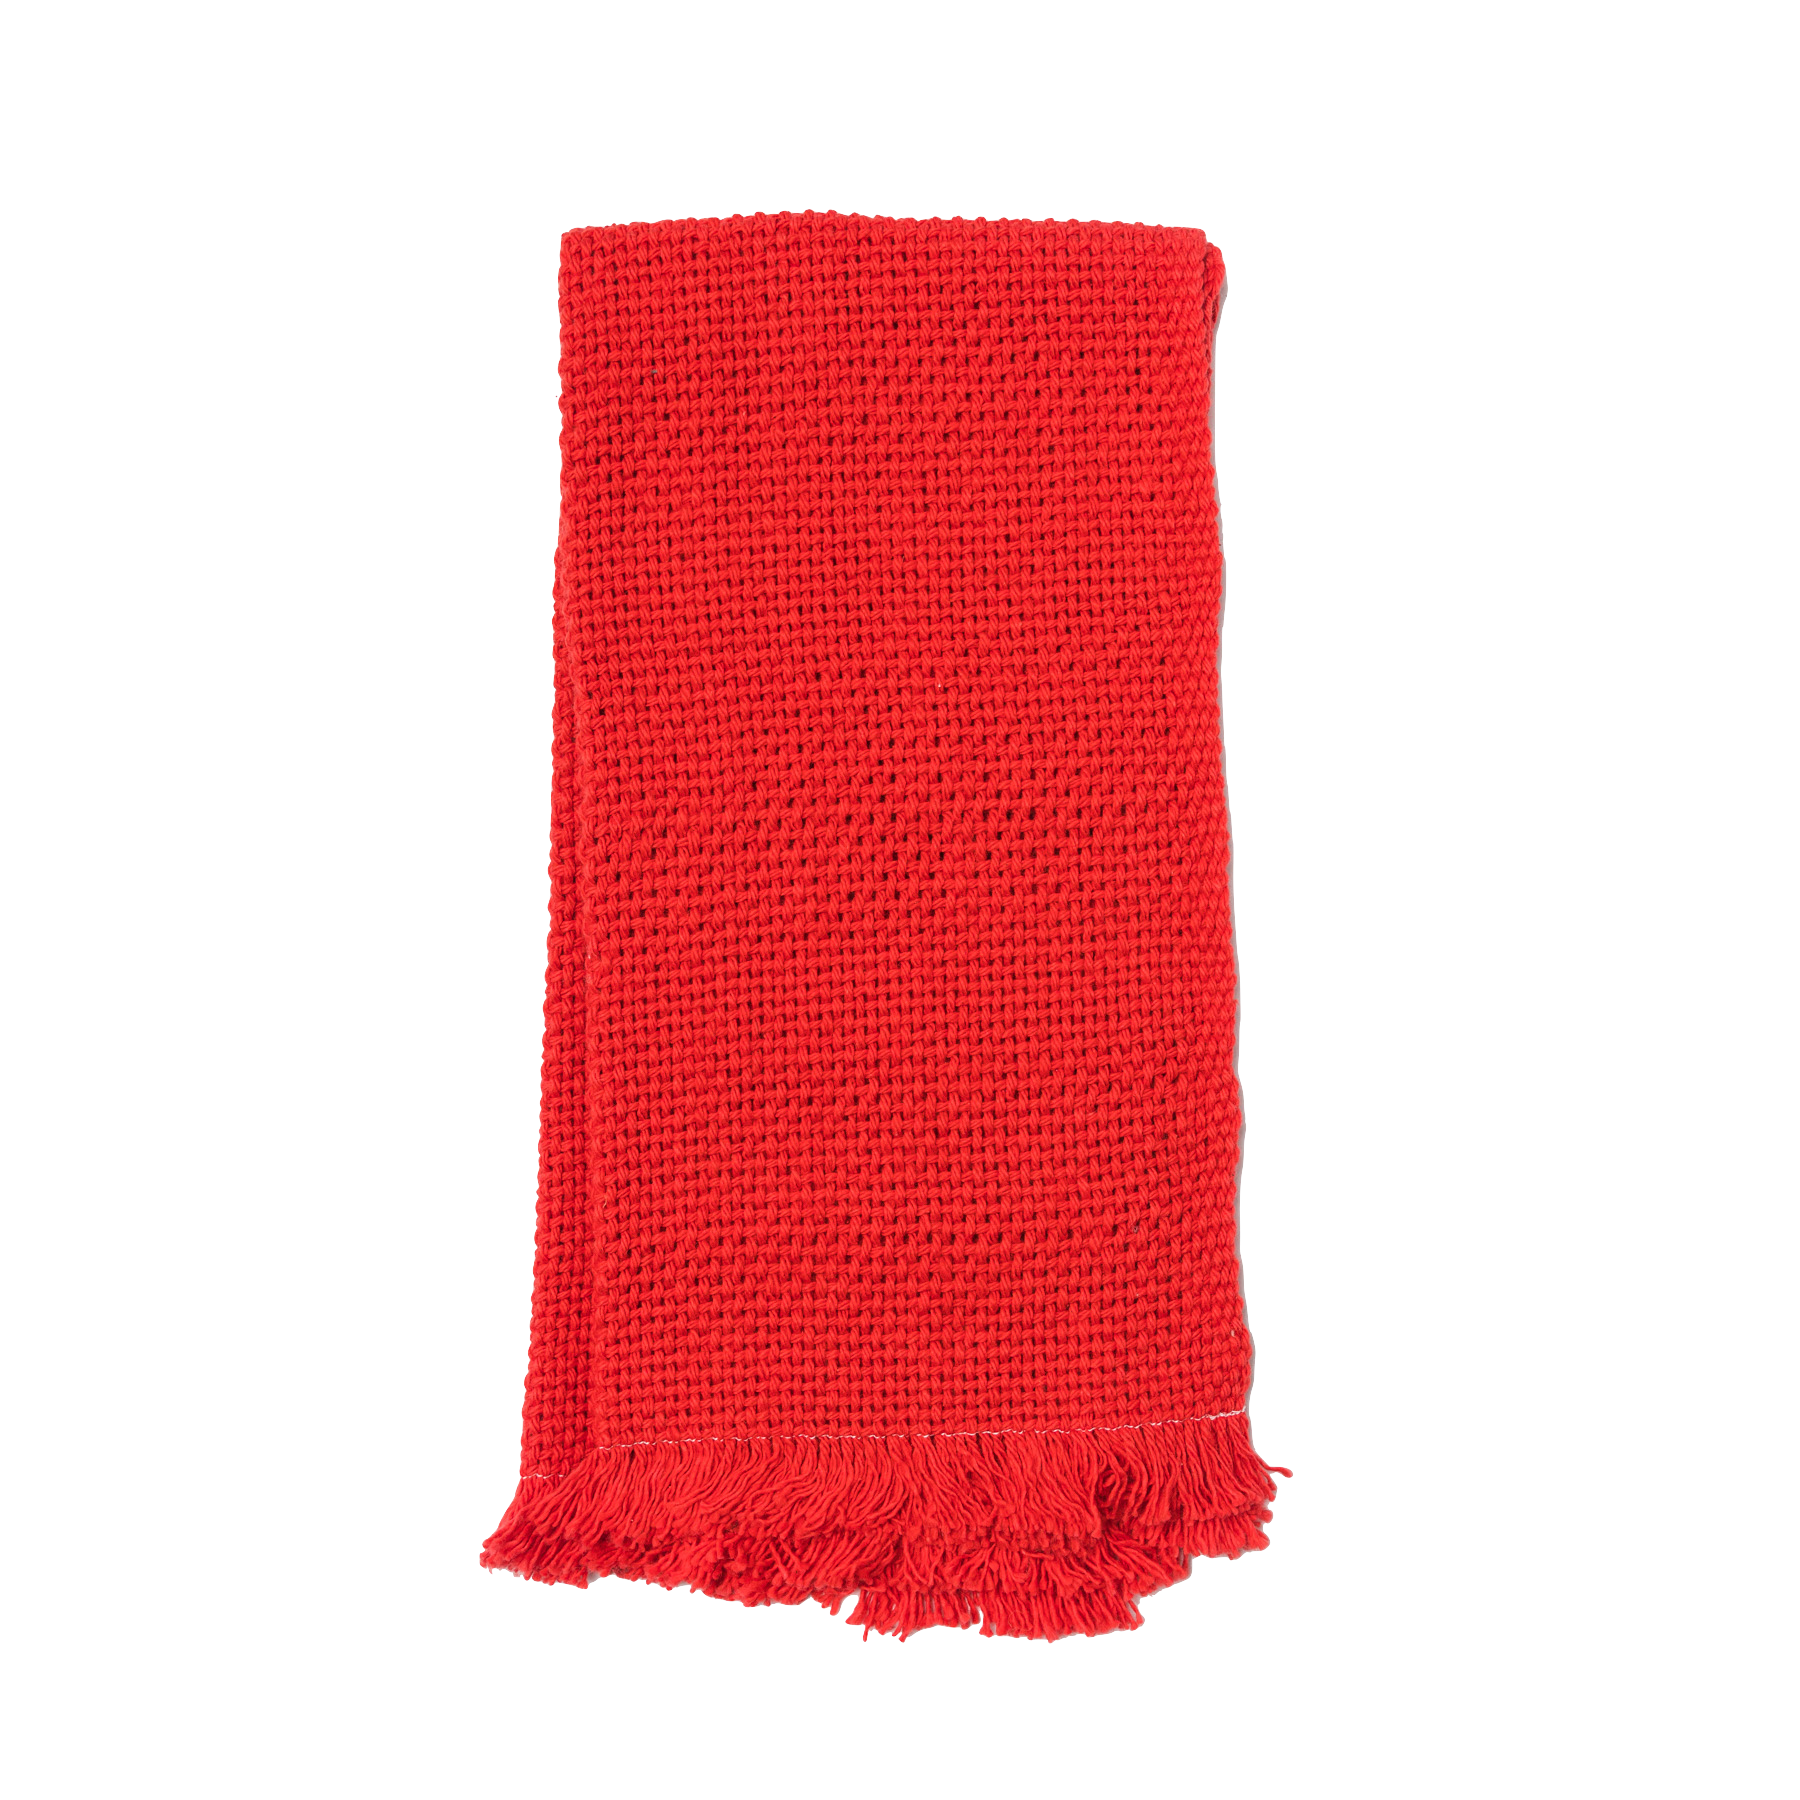 Folded red hand towel